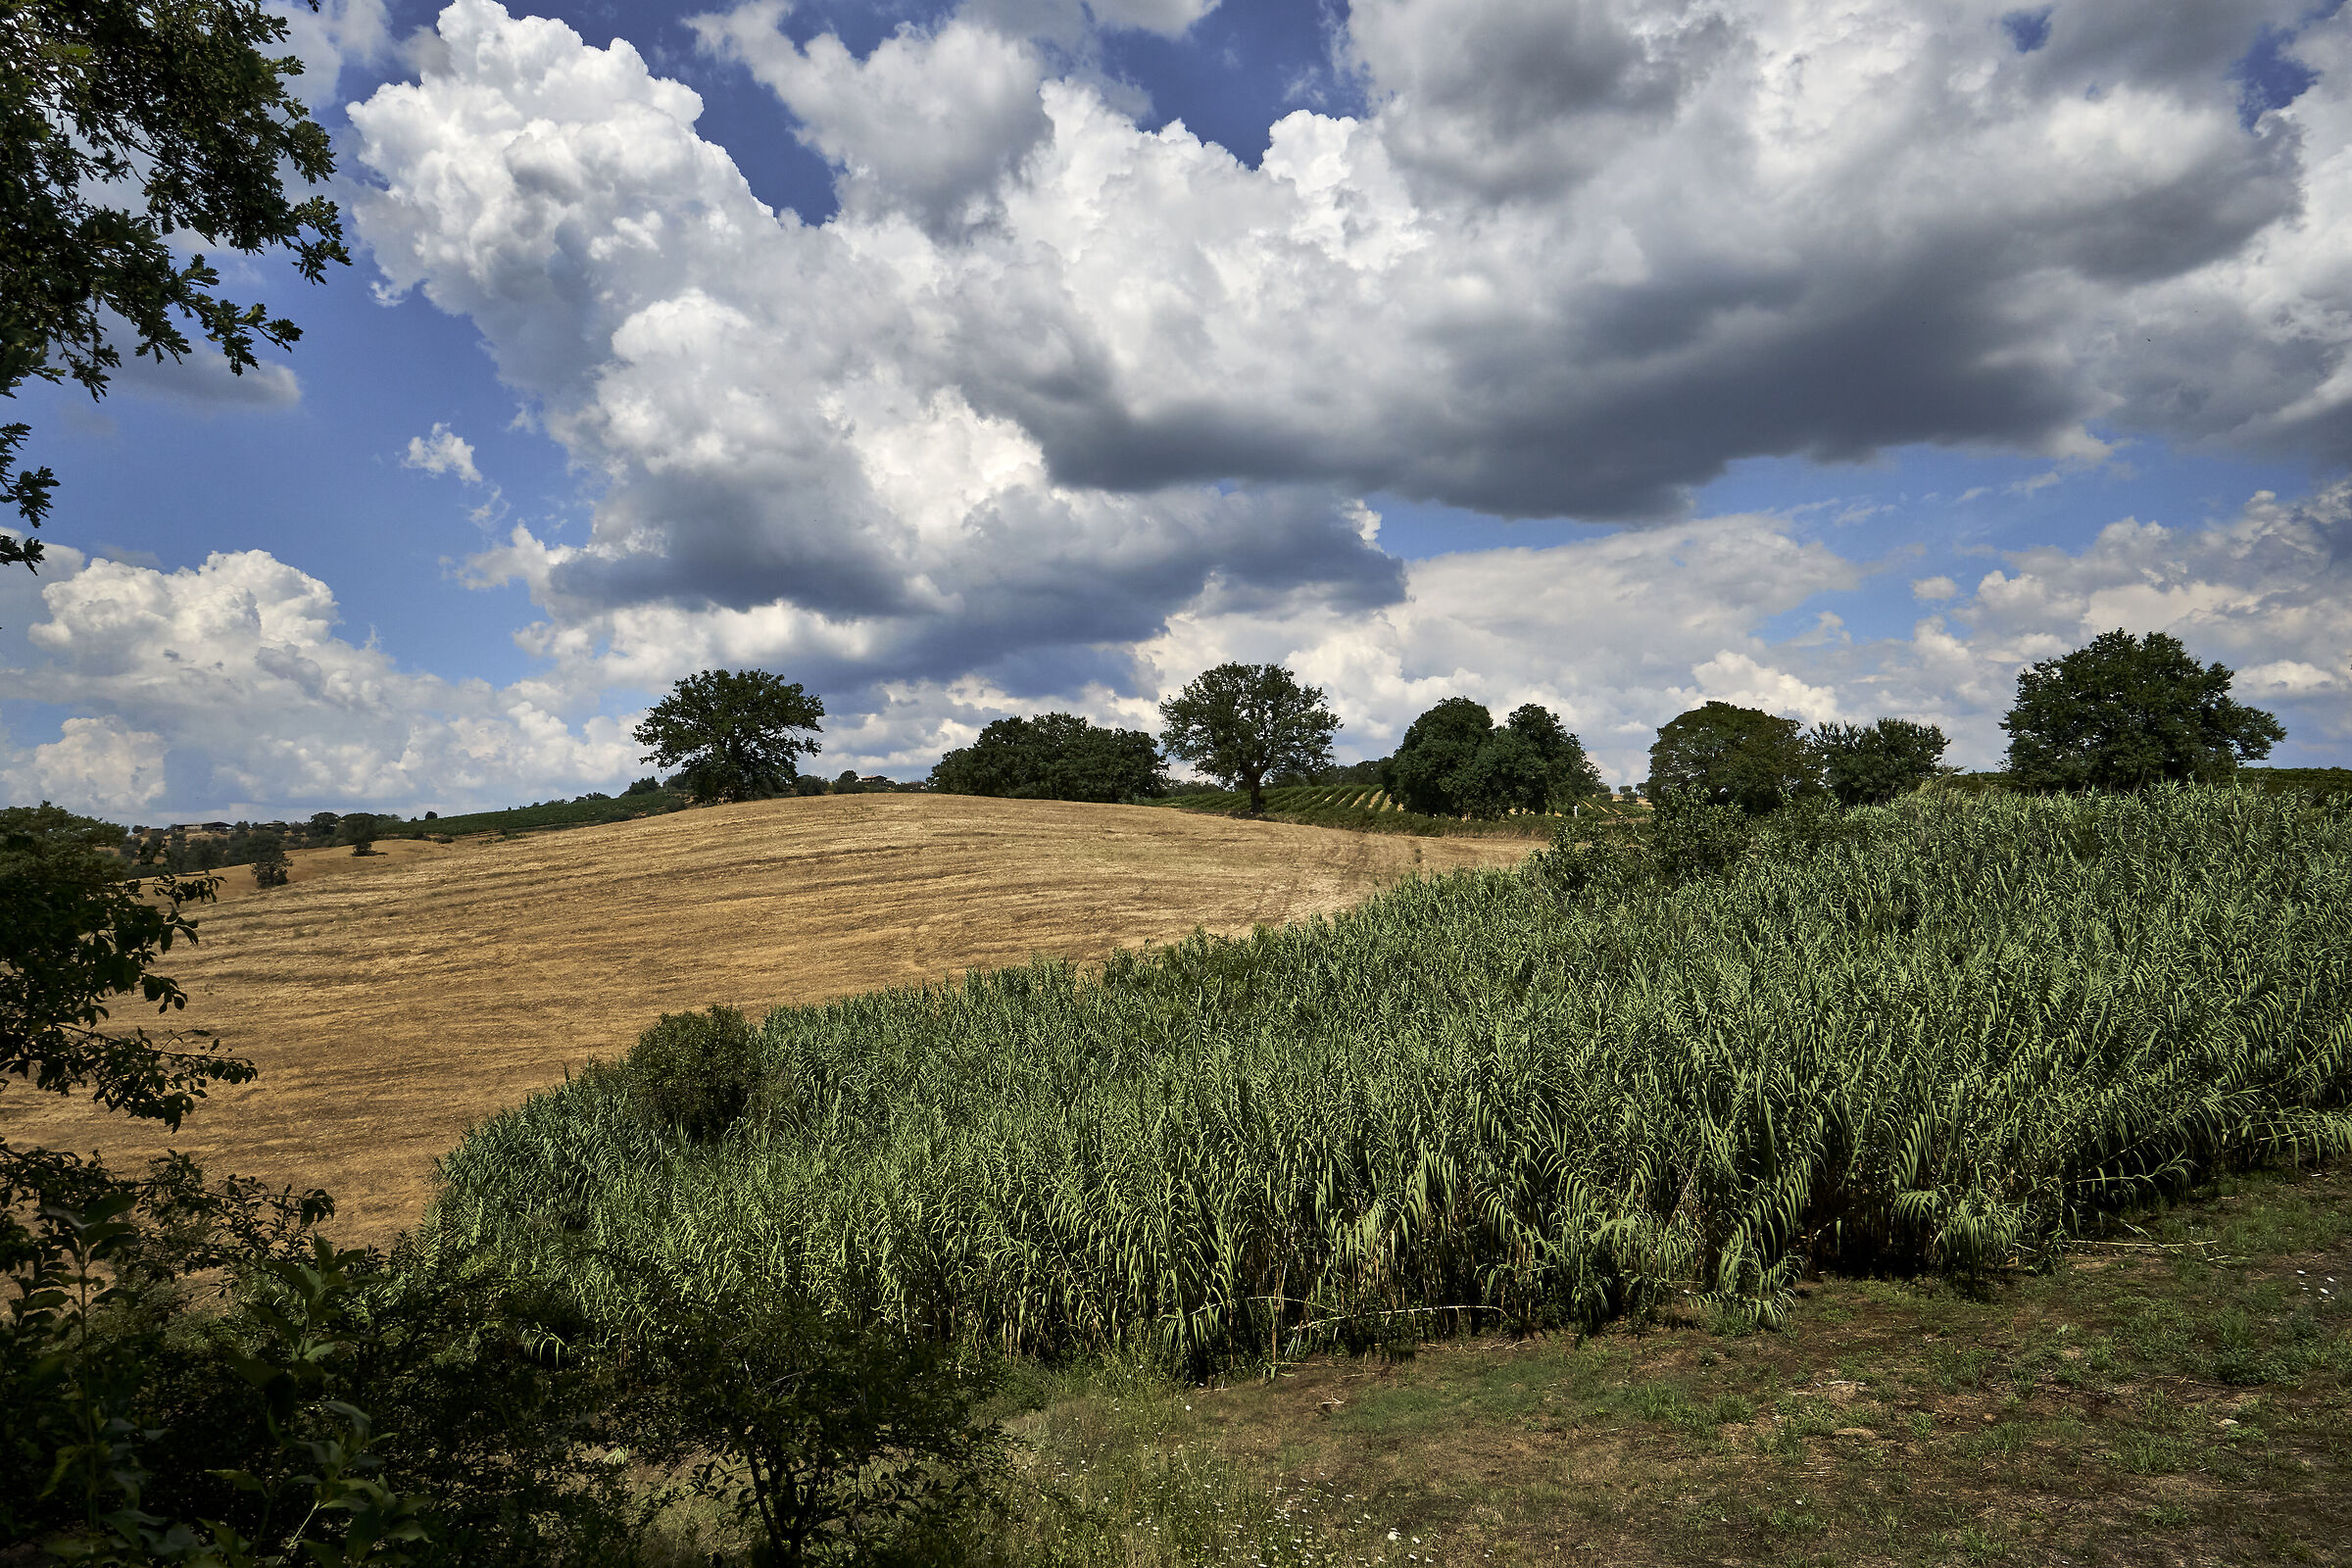 Tuscan countryside (non-sweetened version)...